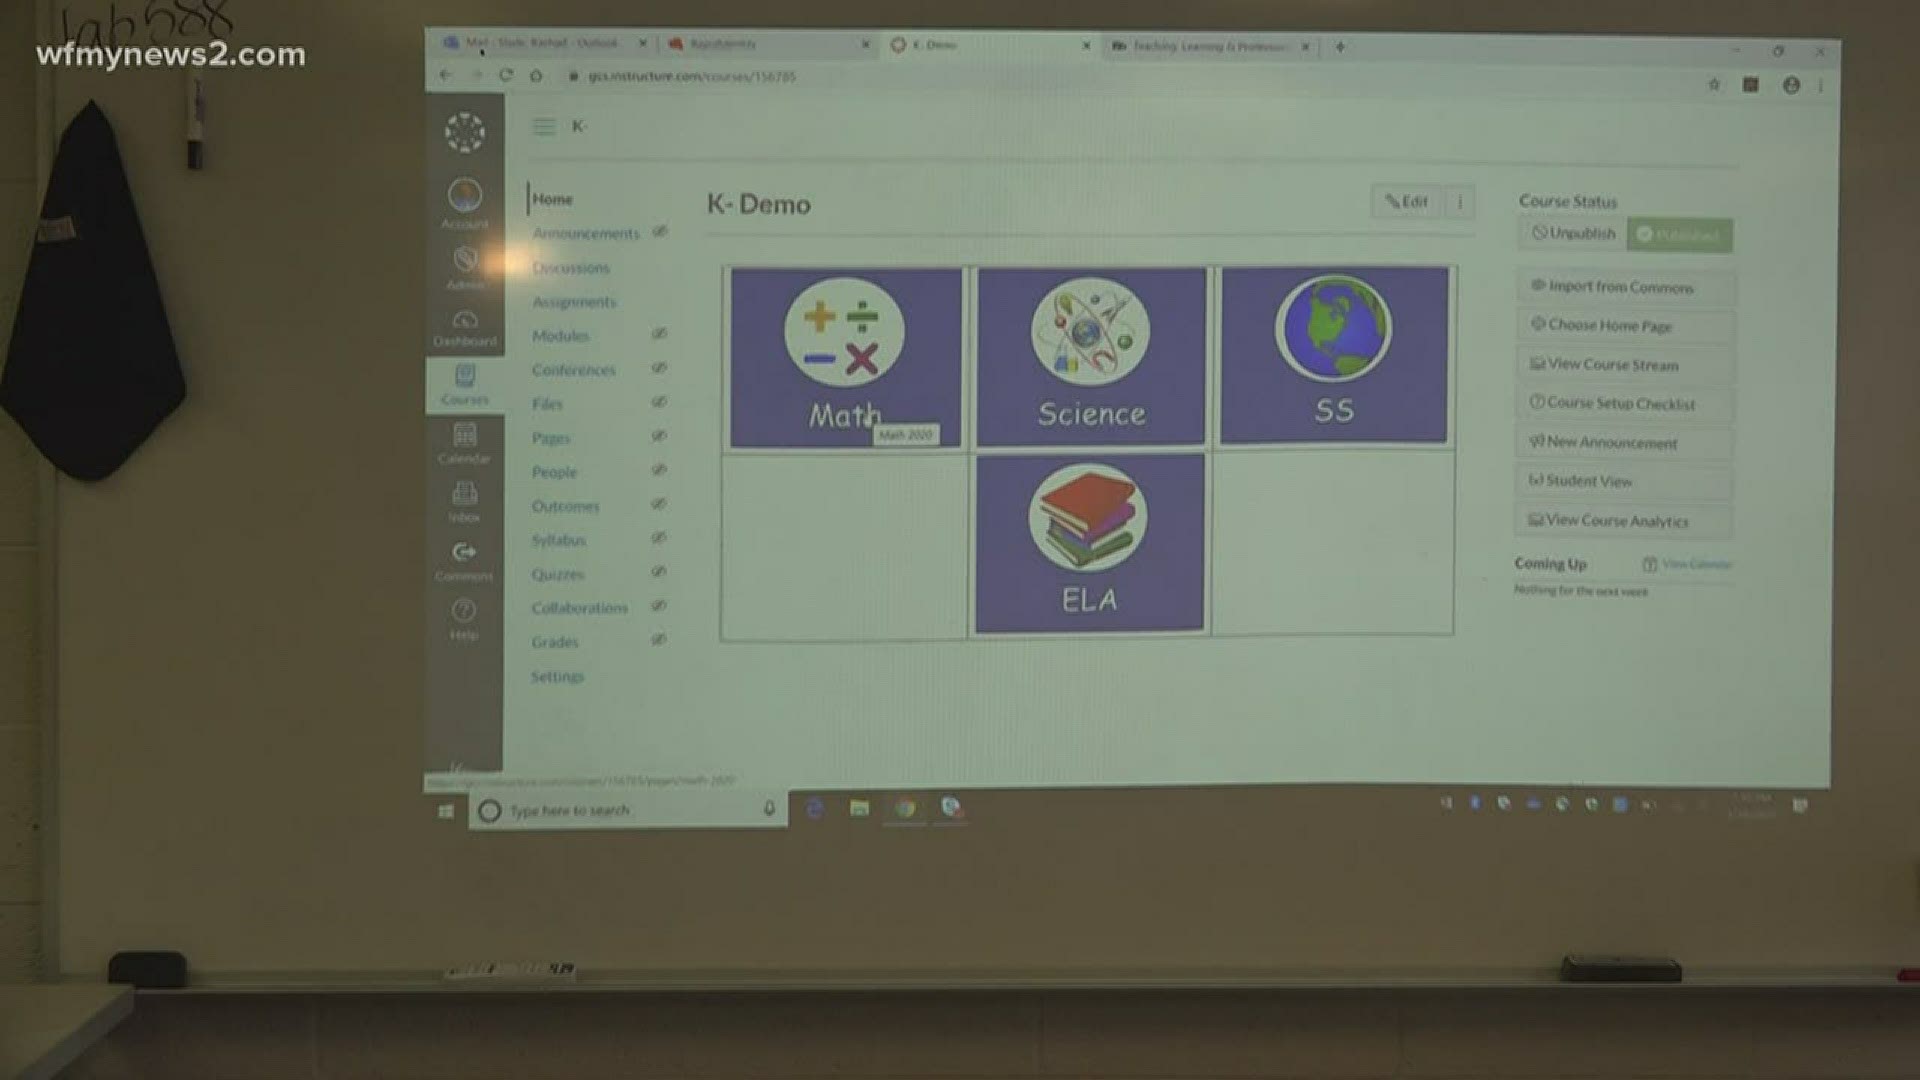 Right now it looks like parents and students will have to deal with remote learning again. The GCS school board described what that could look like.